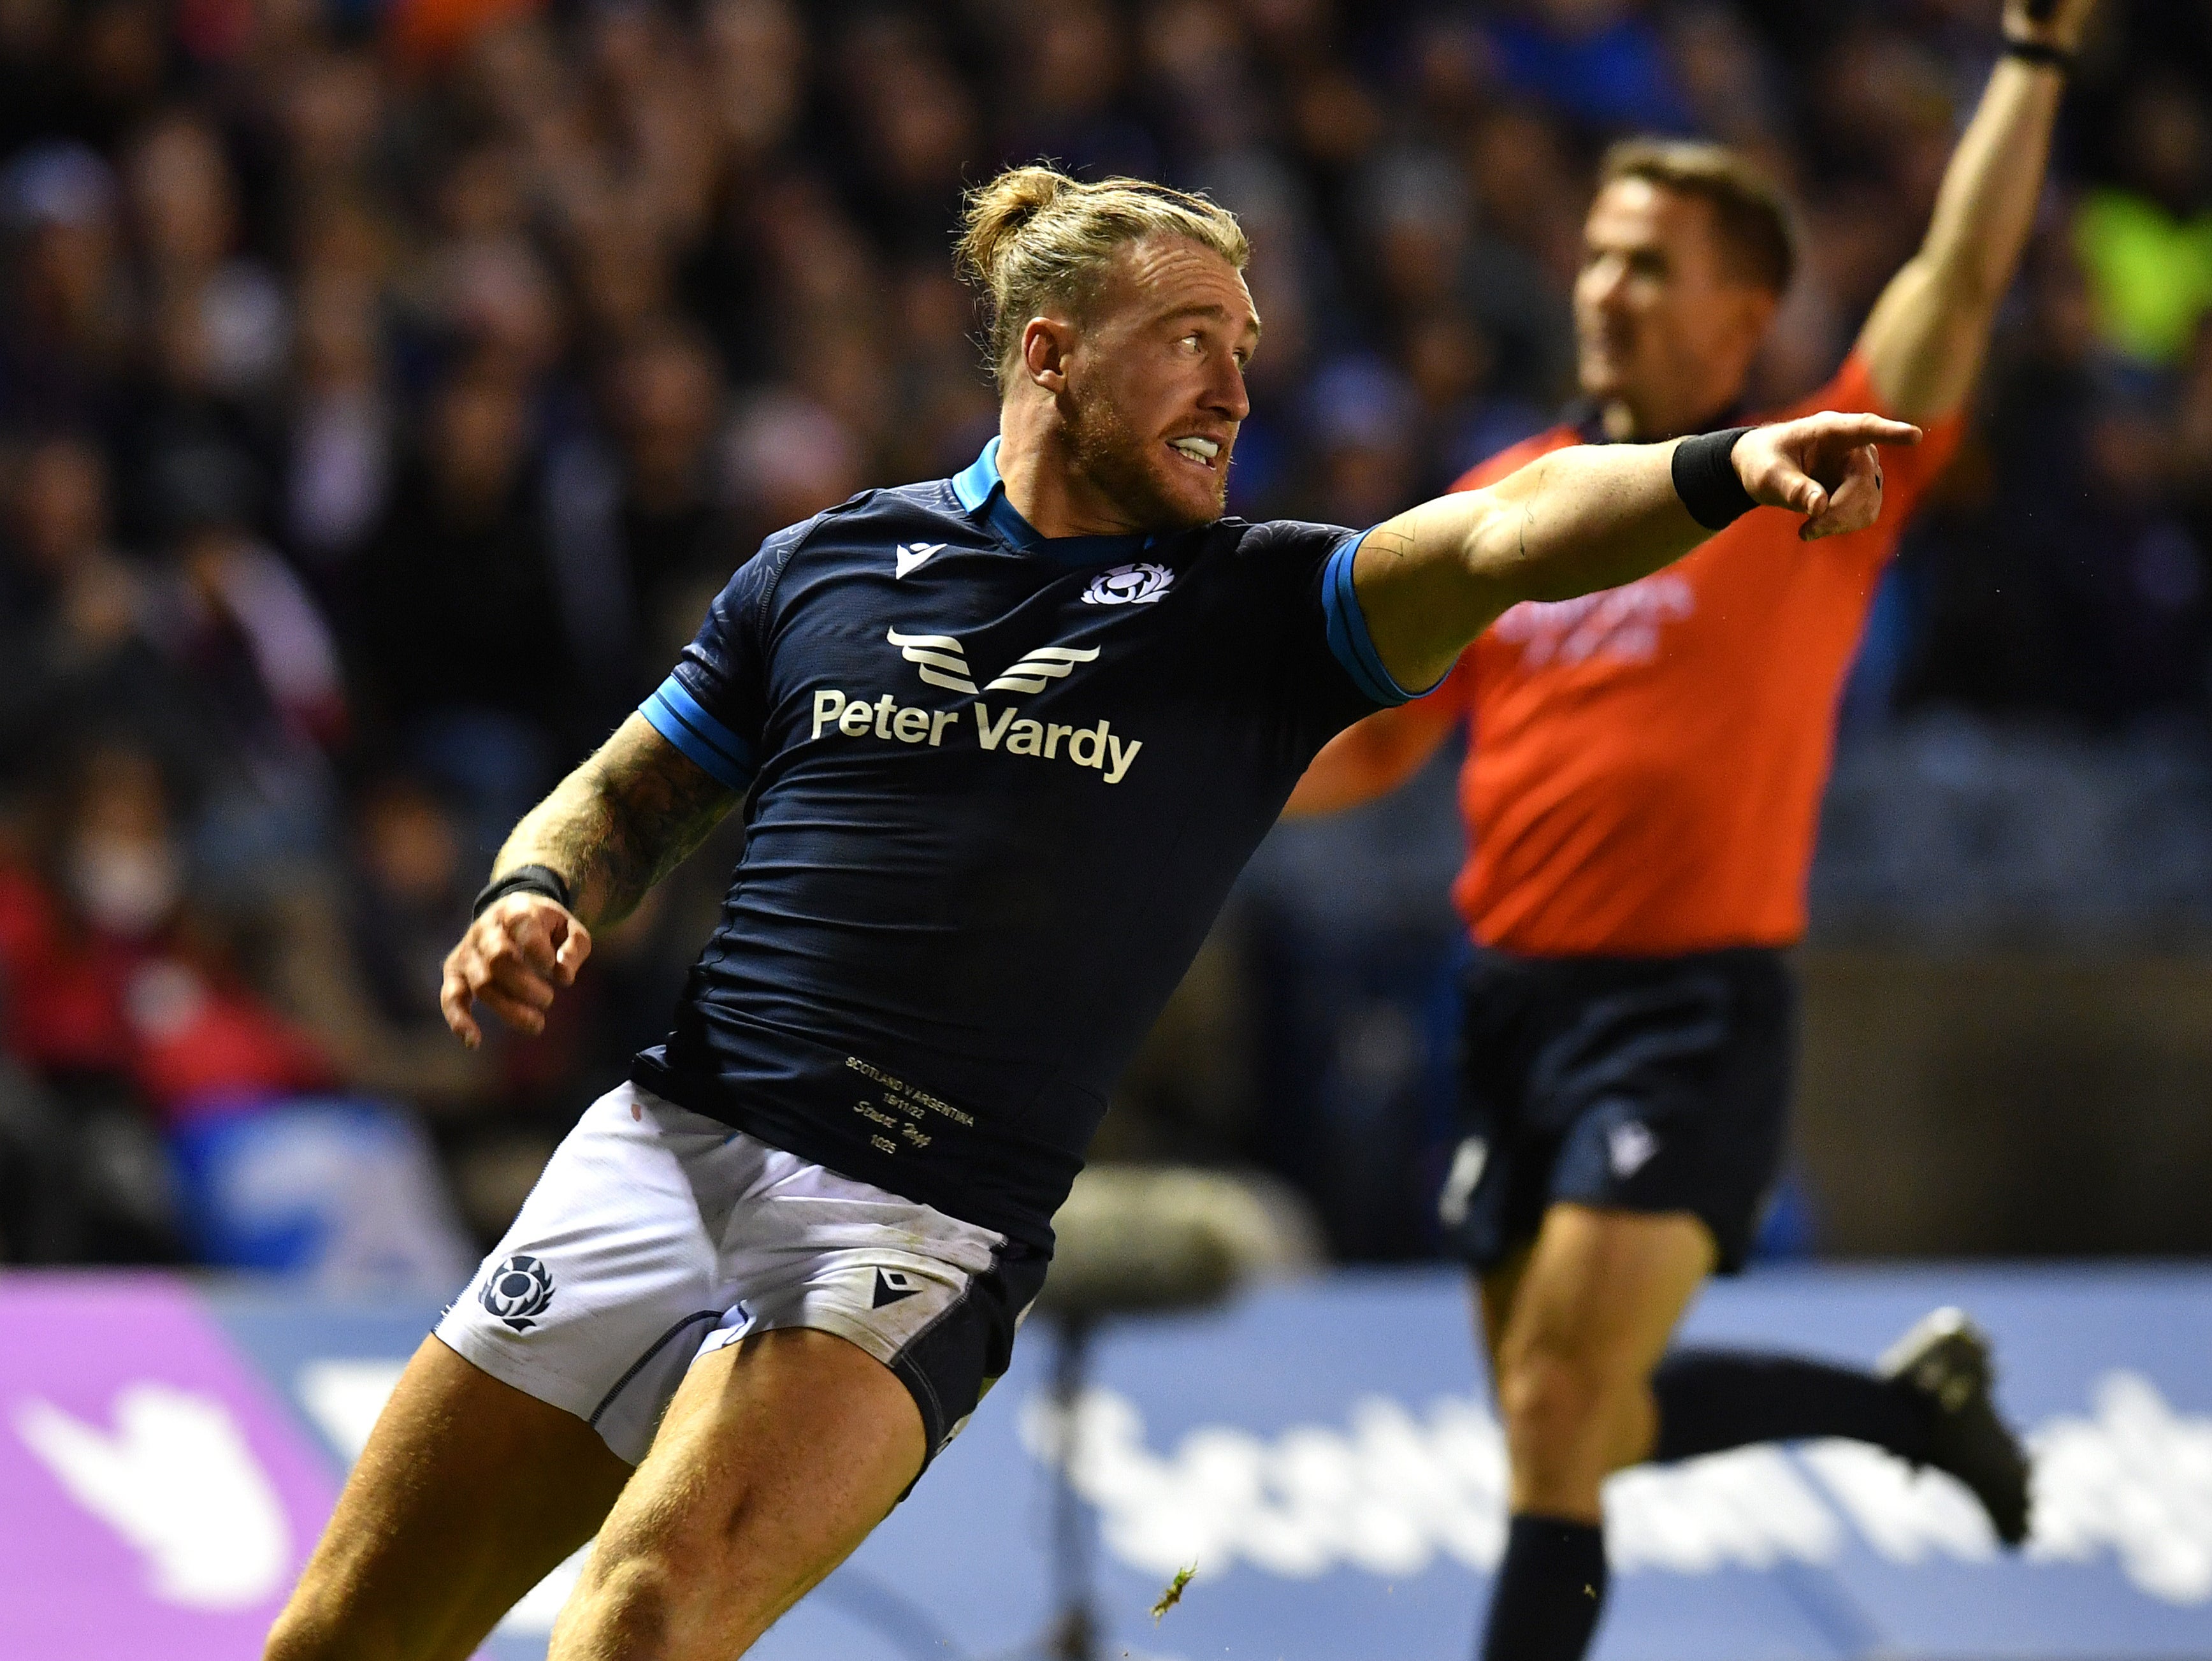 Stuart Hogg will be providing expert insight for The Independent from the World Cup